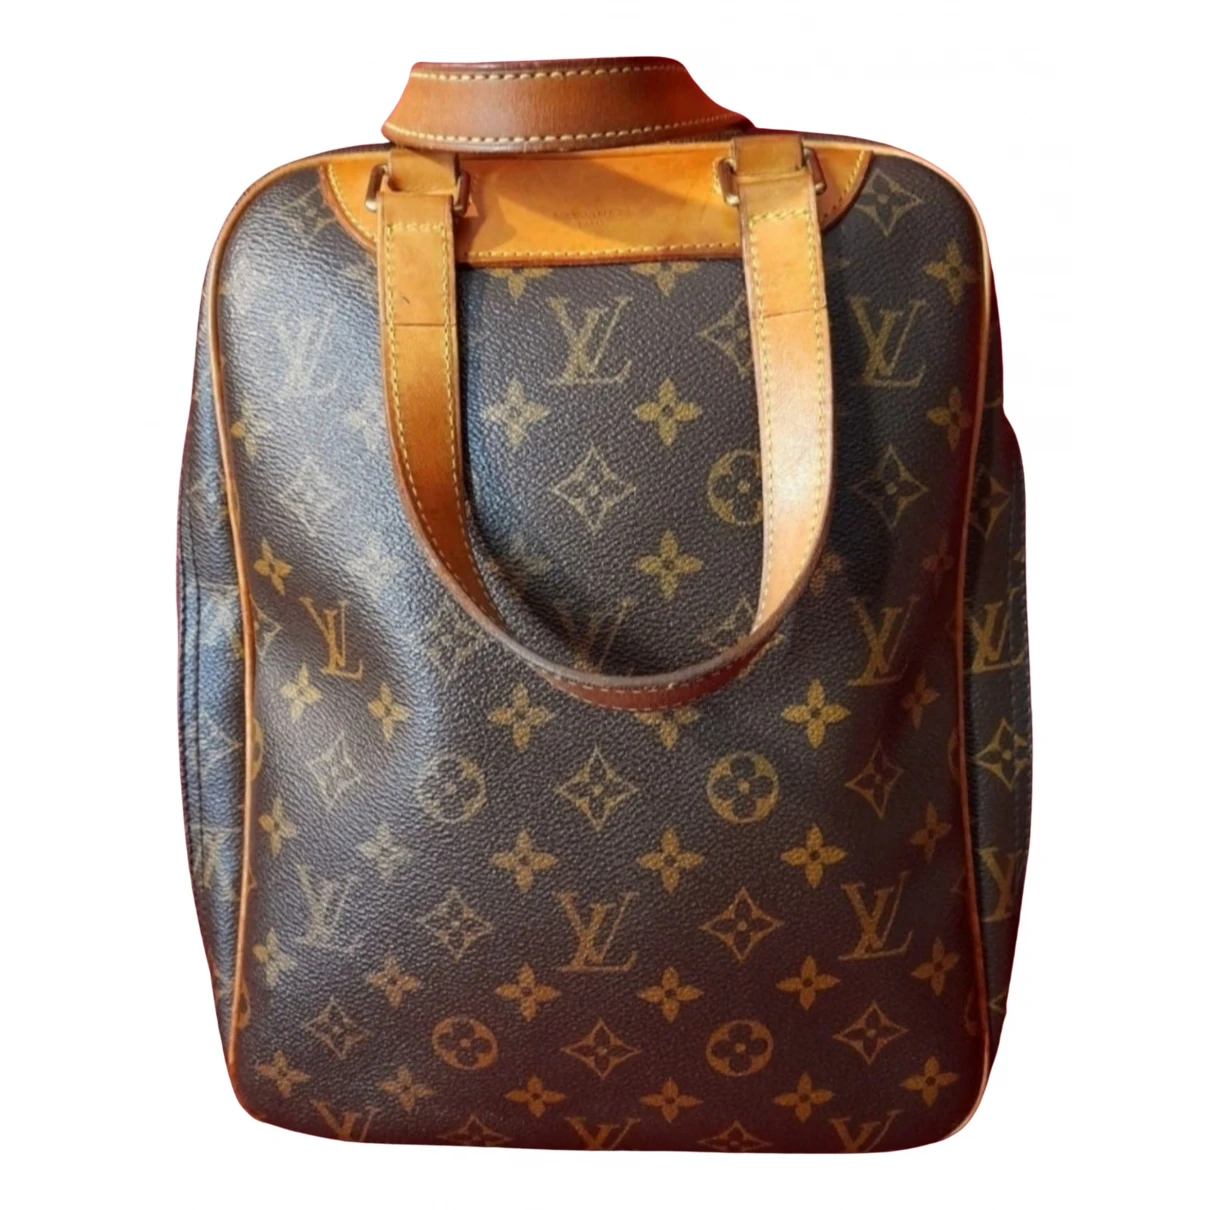 bags Louis Vuitton travel bags Excursion for Female Cloth. Used condition